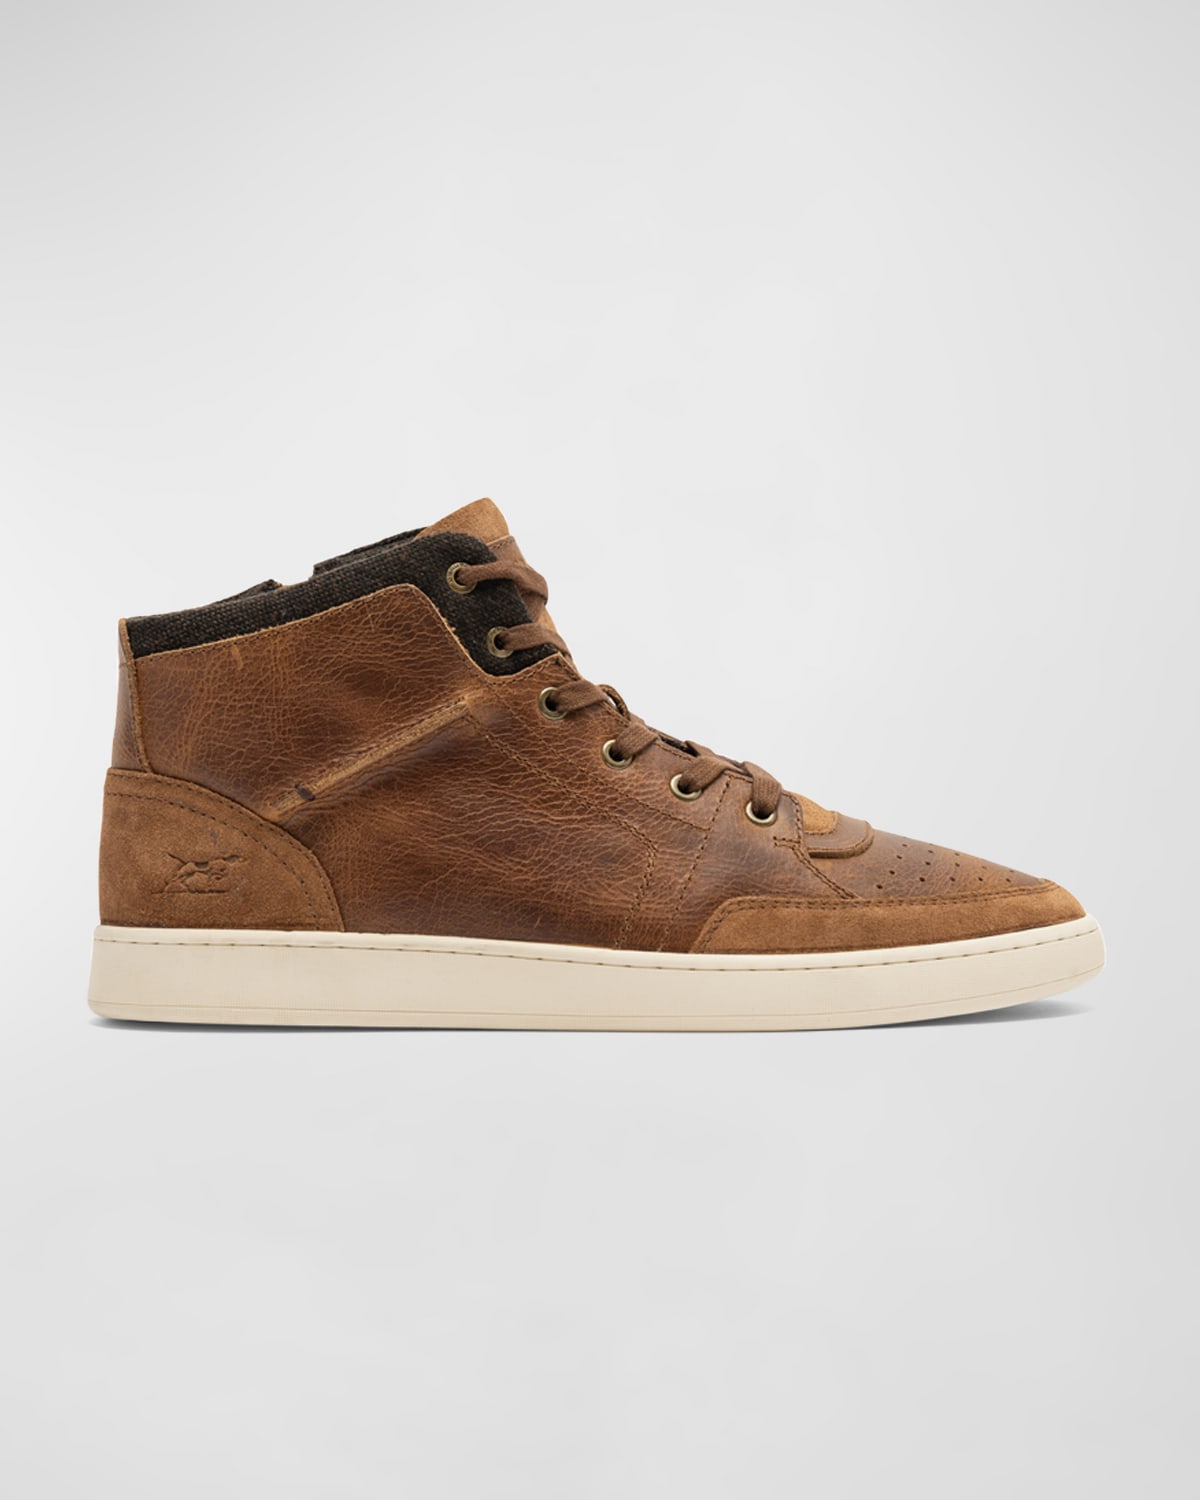 Men's Sussex High Street Leather High-Top Sneakers